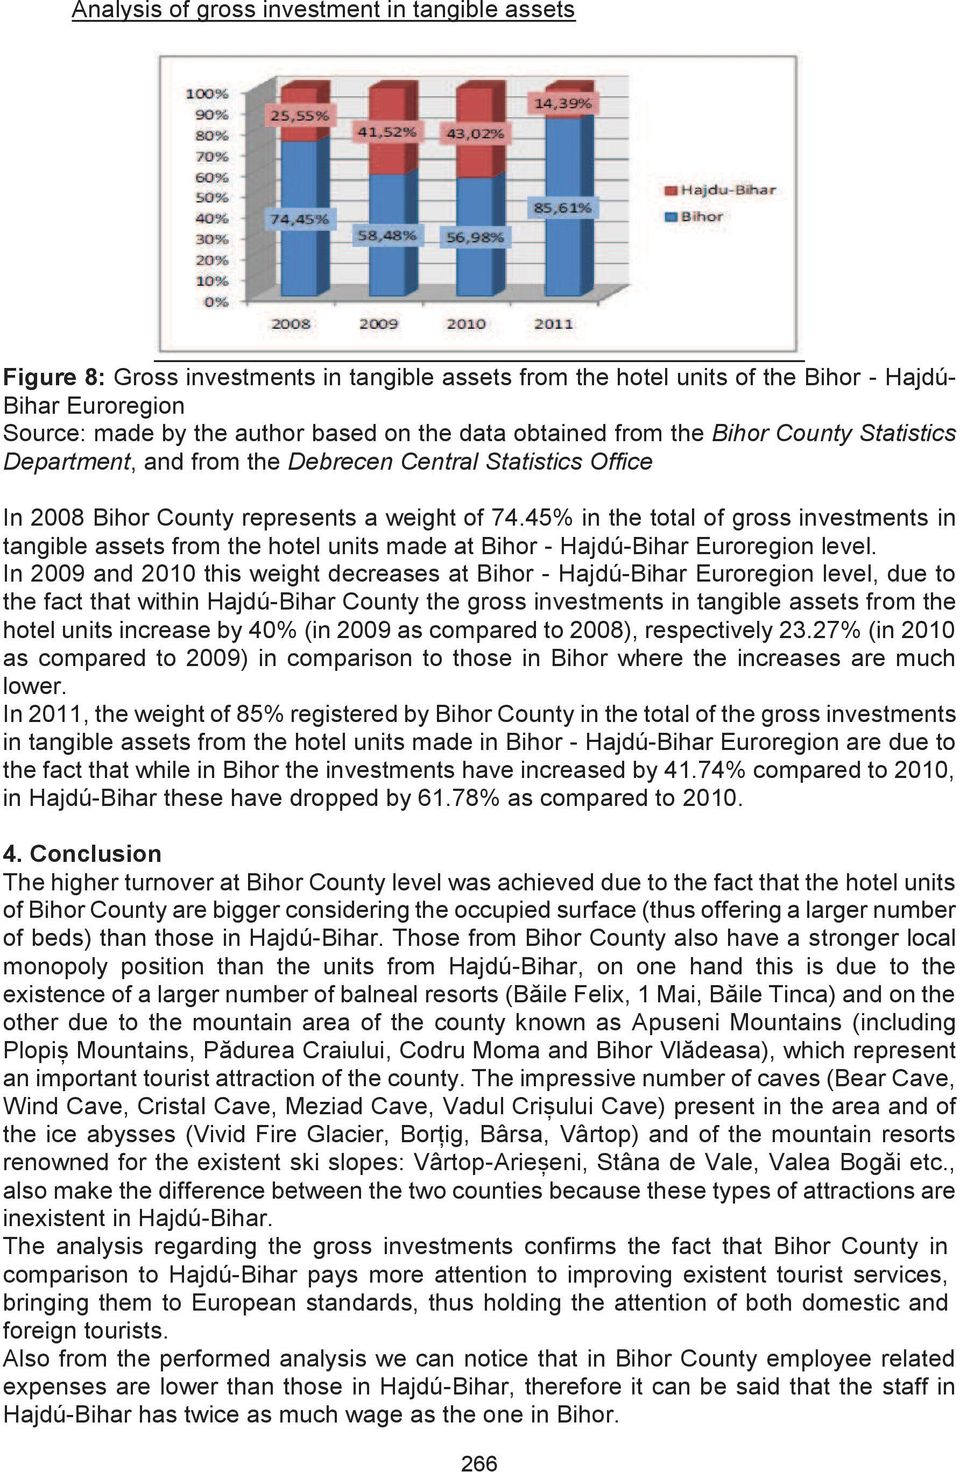 In 2009 and 2010 this weight decreases at Bihor - Hajdú-Bihar Euroregion level, due to the fact that within Hajdú-Bihar County the gross investments in tangible assets from the hotel units increase